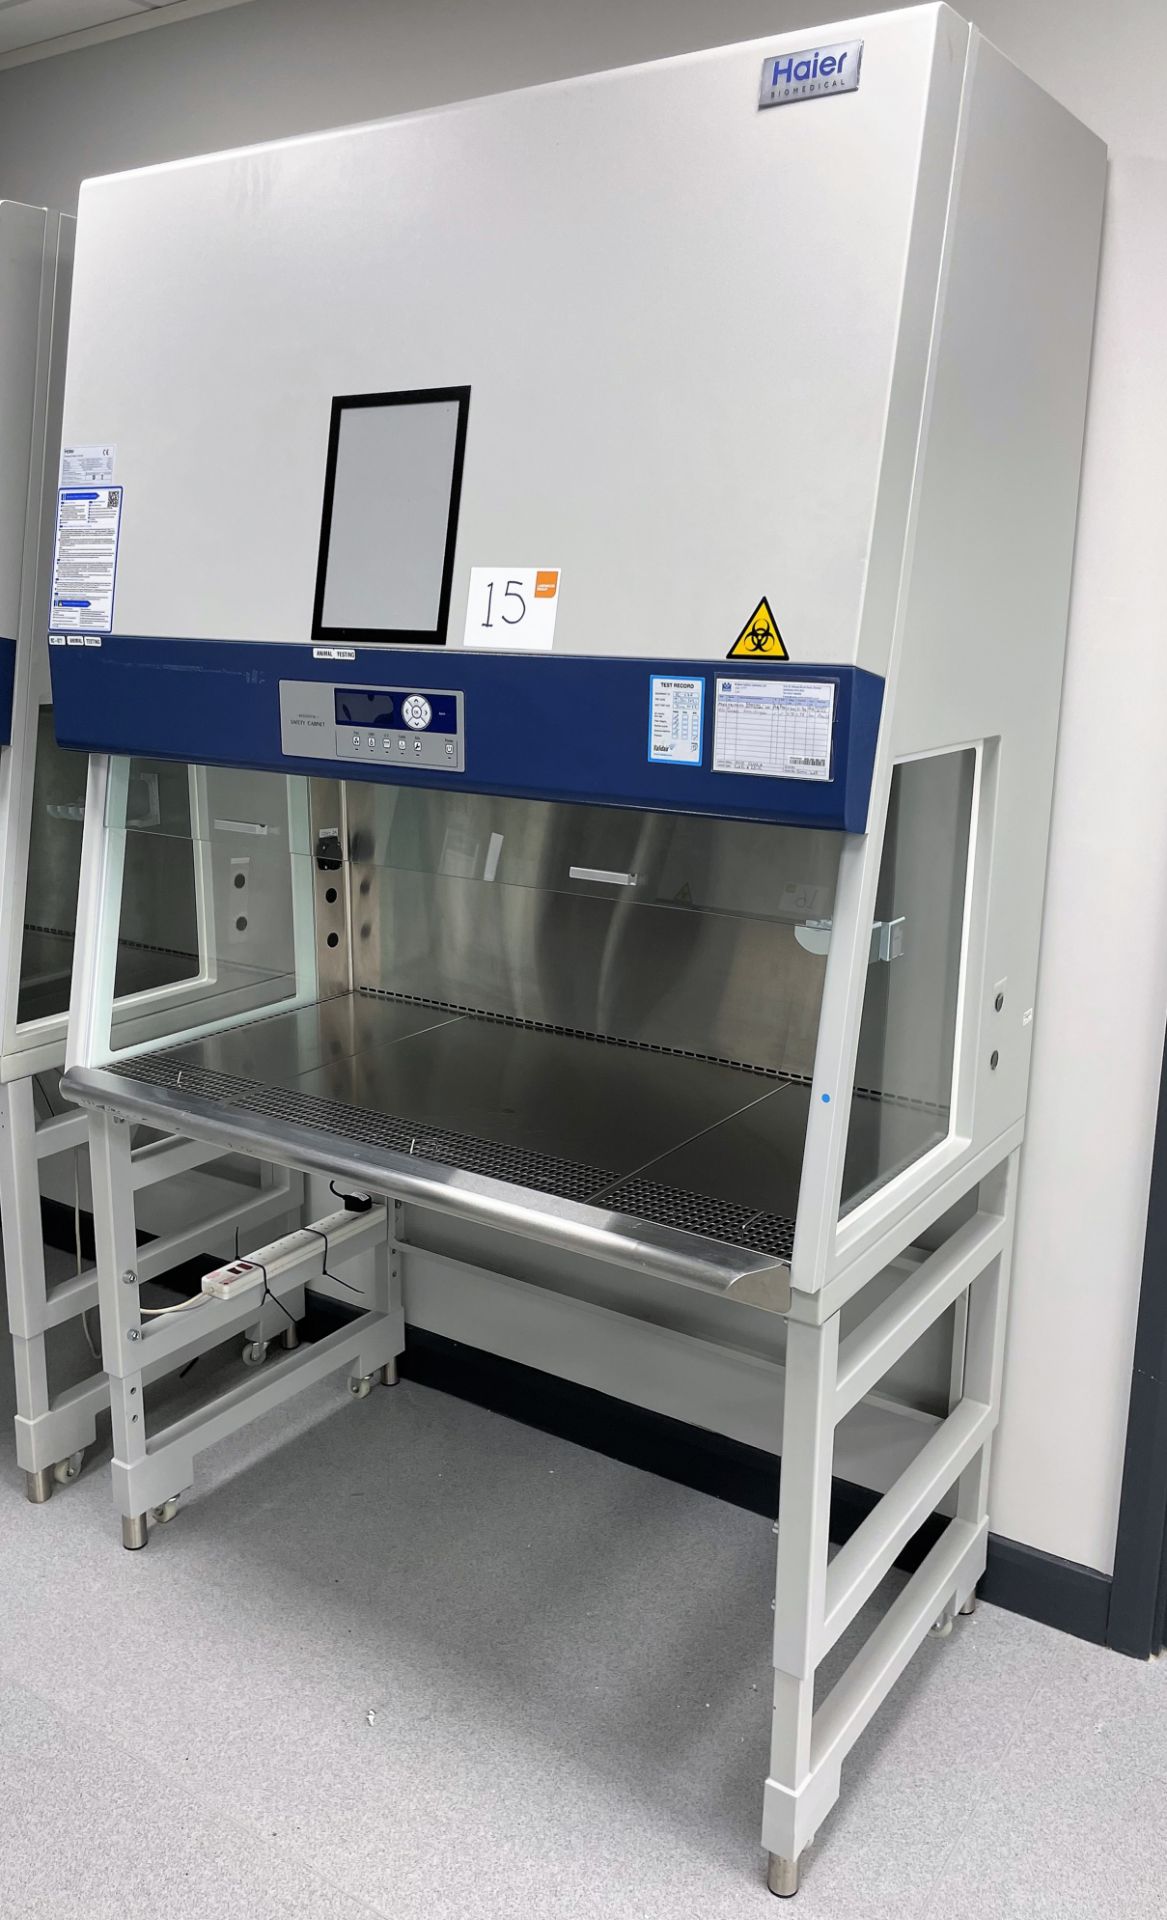 A Haier Biomedical HR 1200-IIA2-D biological safety cabinet on mobile stand no: BE0GG 3EB20 0QHL4